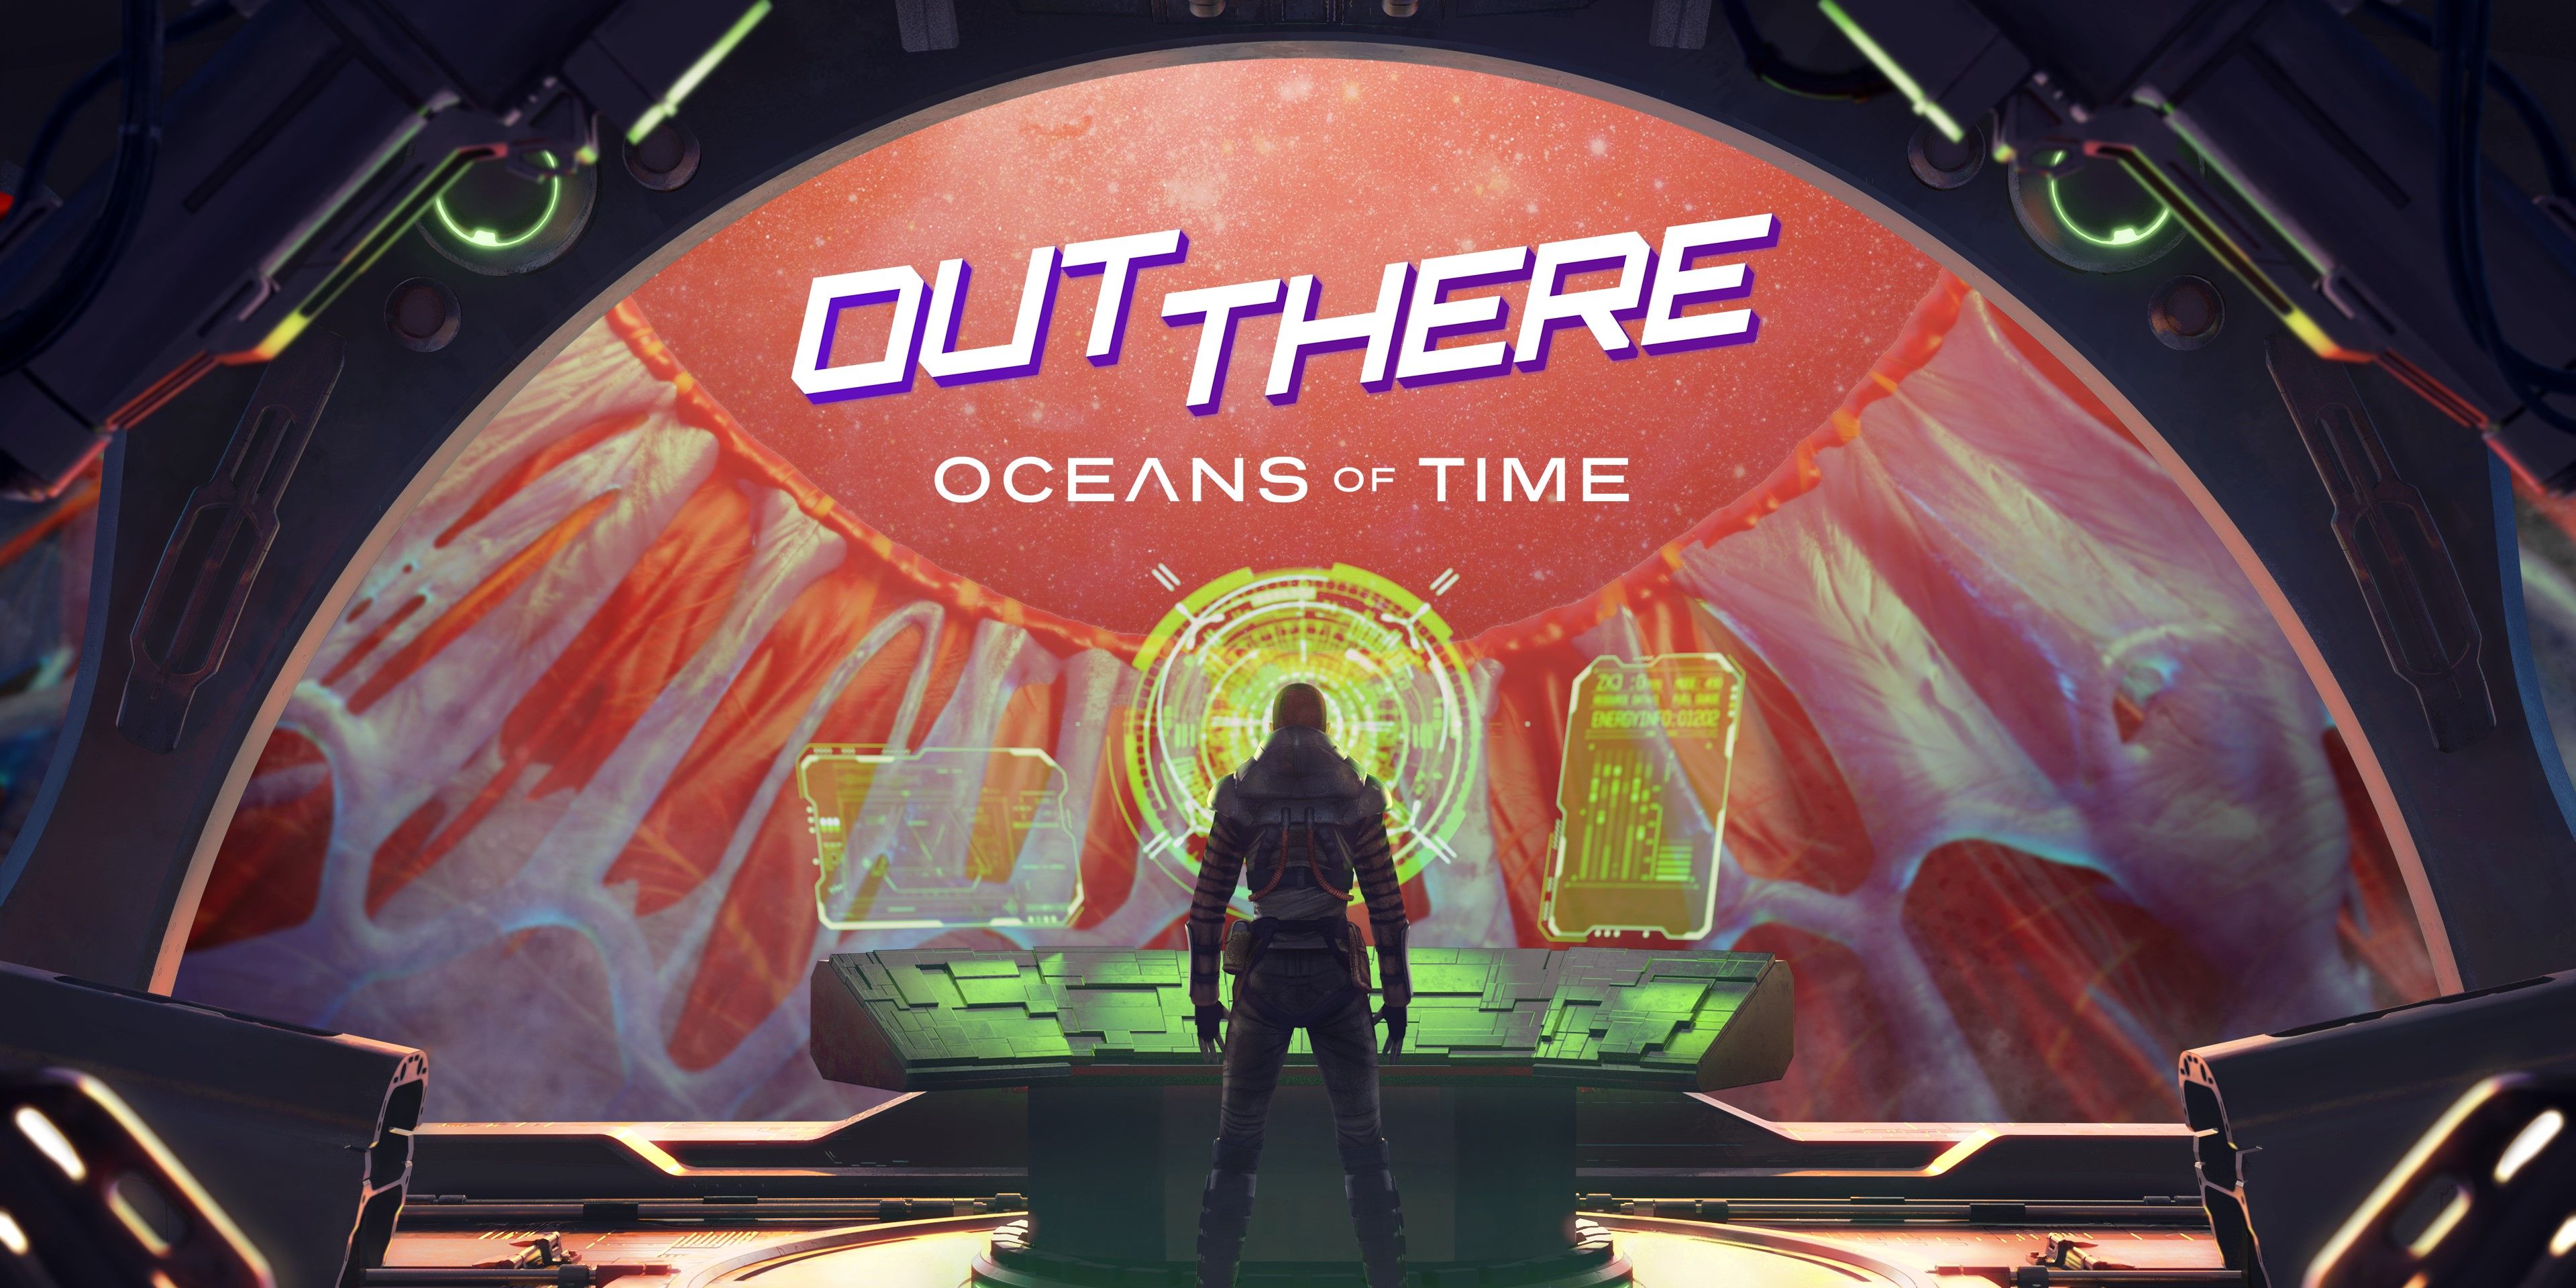 The key art for Out There: Oceans of Time.